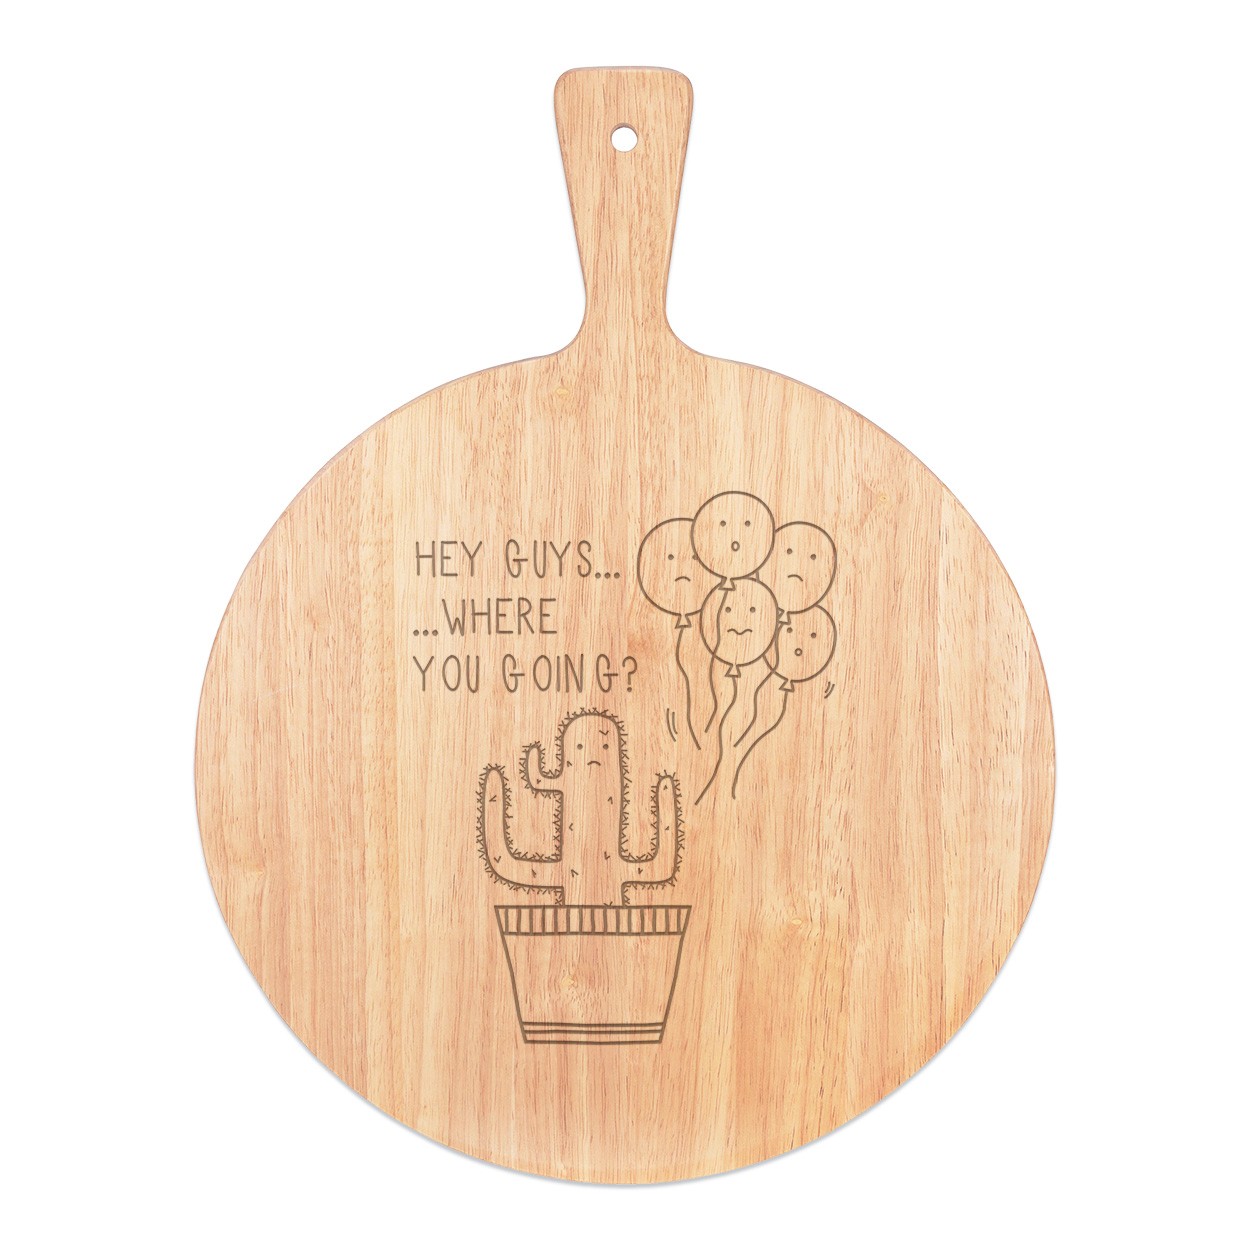 Cactus Hey Guys Where Are You Going Pizza Board Paddle Serving Tray Handle Round Wooden 45x34cm